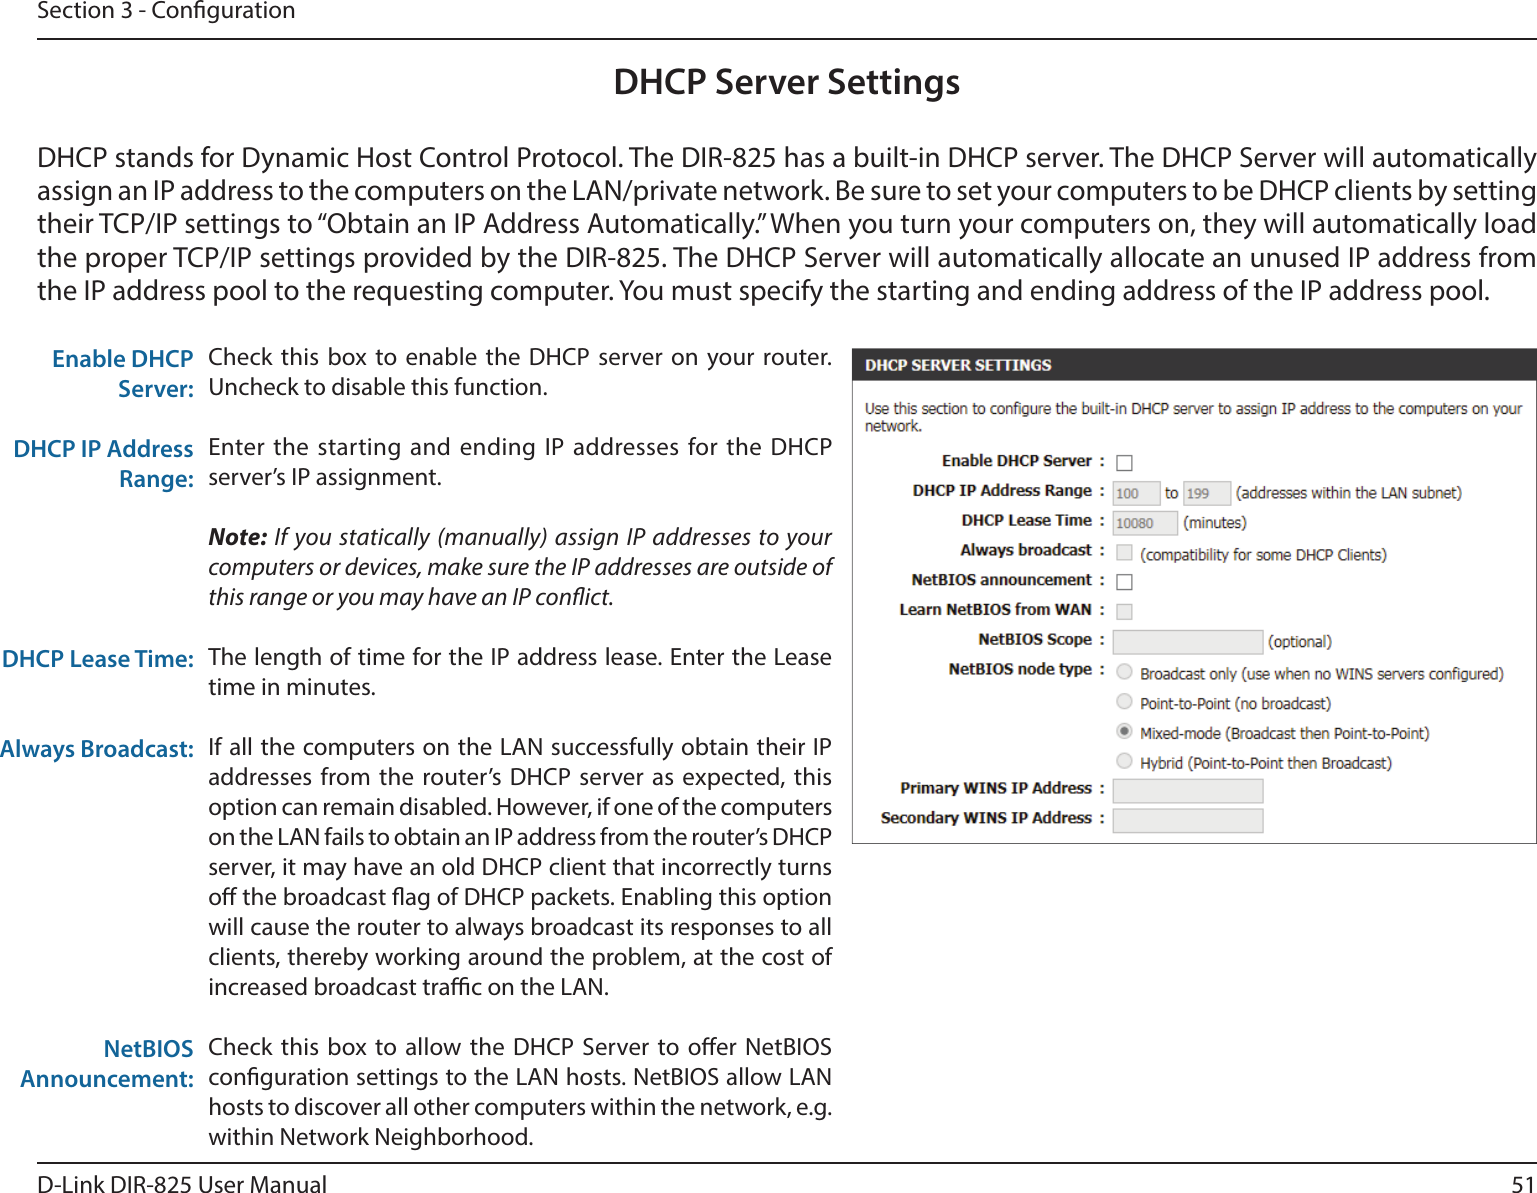 51D-Link DIR-825 User ManualSection 3 - CongurationDHCP Server SettingsDHCP stands for Dynamic Host Control Protocol. The DIR-825 has a built-in DHCP server. The DHCP Server will automatically assign an IP address to the computers on the LAN/private network. Be sure to set your computers to be DHCP clients by setting their TCP/IP settings to “Obtain an IP Address Automatically.” When you turn your computers on, they will automatically load the proper TCP/IP settings provided by the DIR-825. The DHCP Server will automatically allocate an unused IP address from the IP address pool to the requesting computer. You must specify the starting and ending address of the IP address pool.Check this box to enable the DHCP server on your router. Uncheck to disable this function.Enter the starting and ending IP addresses for the DHCP server’s IP assignment.Note: If you statically (manually) assign IP addresses to your computers or devices, make sure the IP addresses are outside of this range or you may have an IP conict. The length of time for the IP address lease. Enter the Lease time in minutes.If all the computers on the LAN successfully obtain their IP addresses from the router’s DHCP server as expected, this option can remain disabled. However, if one of the computers on the LAN fails to obtain an IP address from the router’s DHCP server, it may have an old DHCP client that incorrectly turns o the broadcast ag of DHCP packets. Enabling this option will cause the router to always broadcast its responses to all clients, thereby working around the problem, at the cost of increased broadcast trac on the LAN.Check this box to allow the DHCP Server to oer NetBIOS conguration settings to the LAN hosts. NetBIOS allow LAN hosts to discover all other computers within the network, e.g. within Network Neighborhood.Enable DHCP Server:DHCP IP Address Range:DHCP Lease Time:Always Broadcast:NetBIOS Announcement: